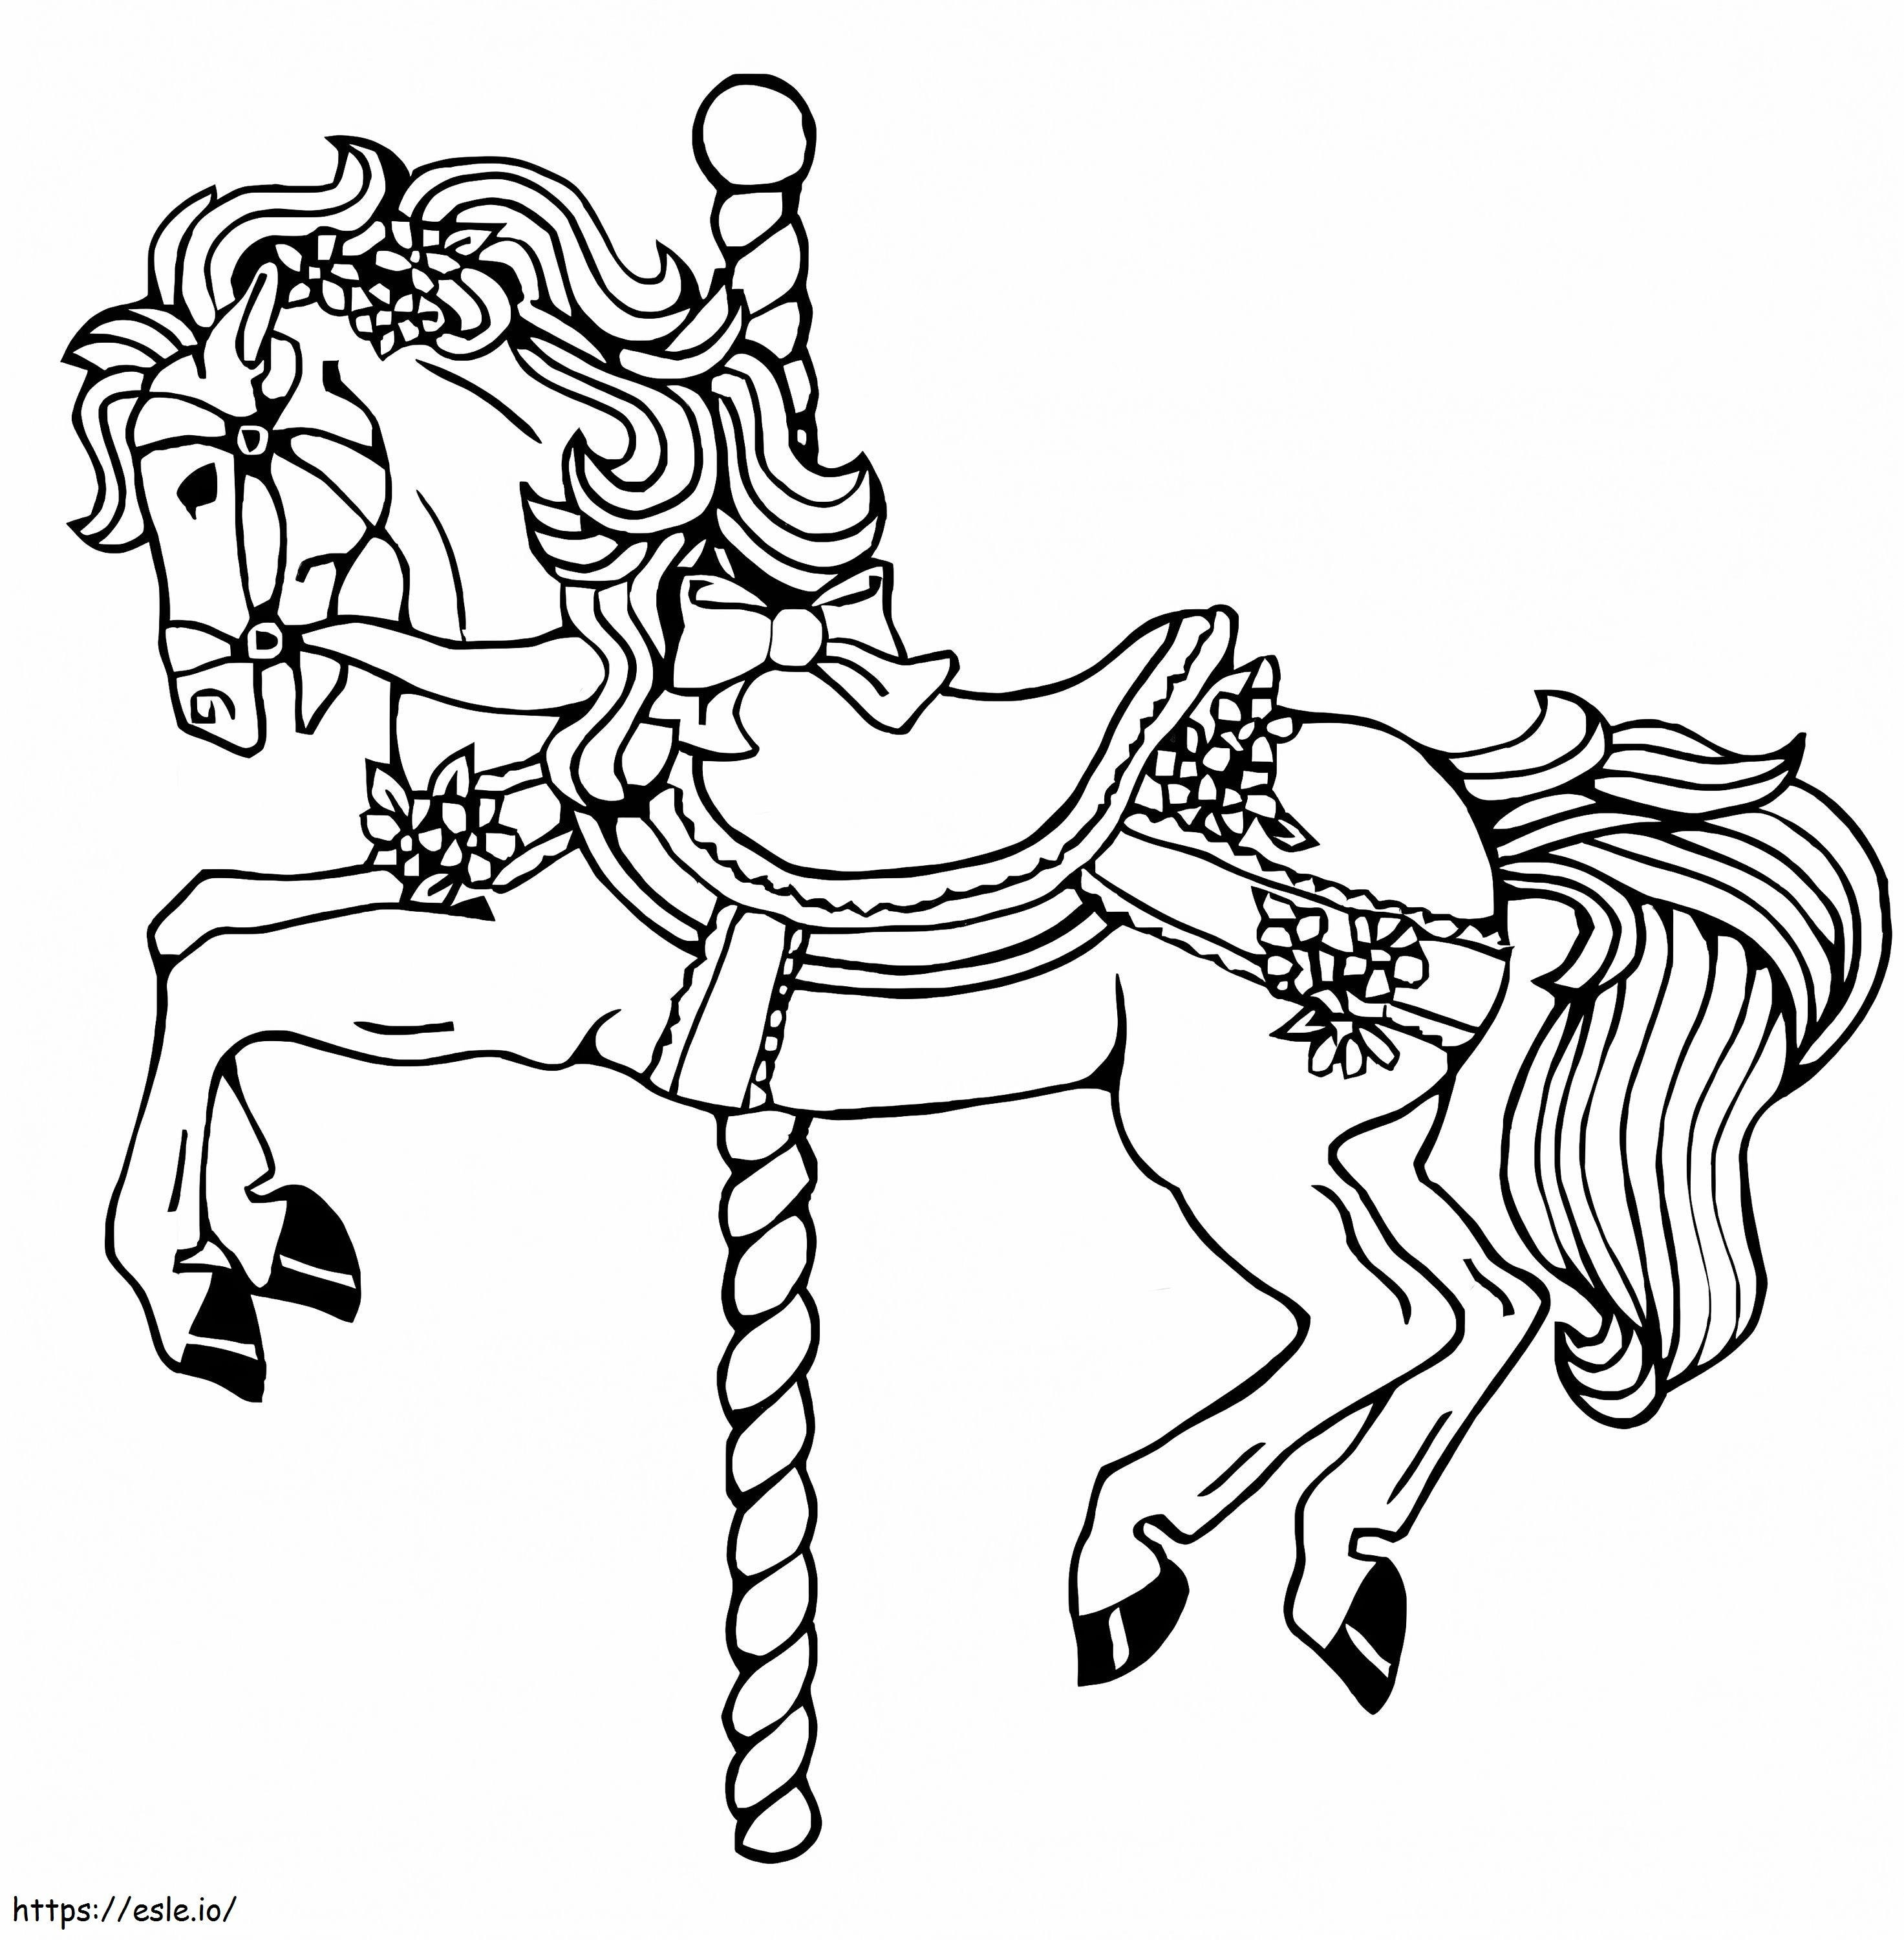 Free Printable Carousel Horse coloring page